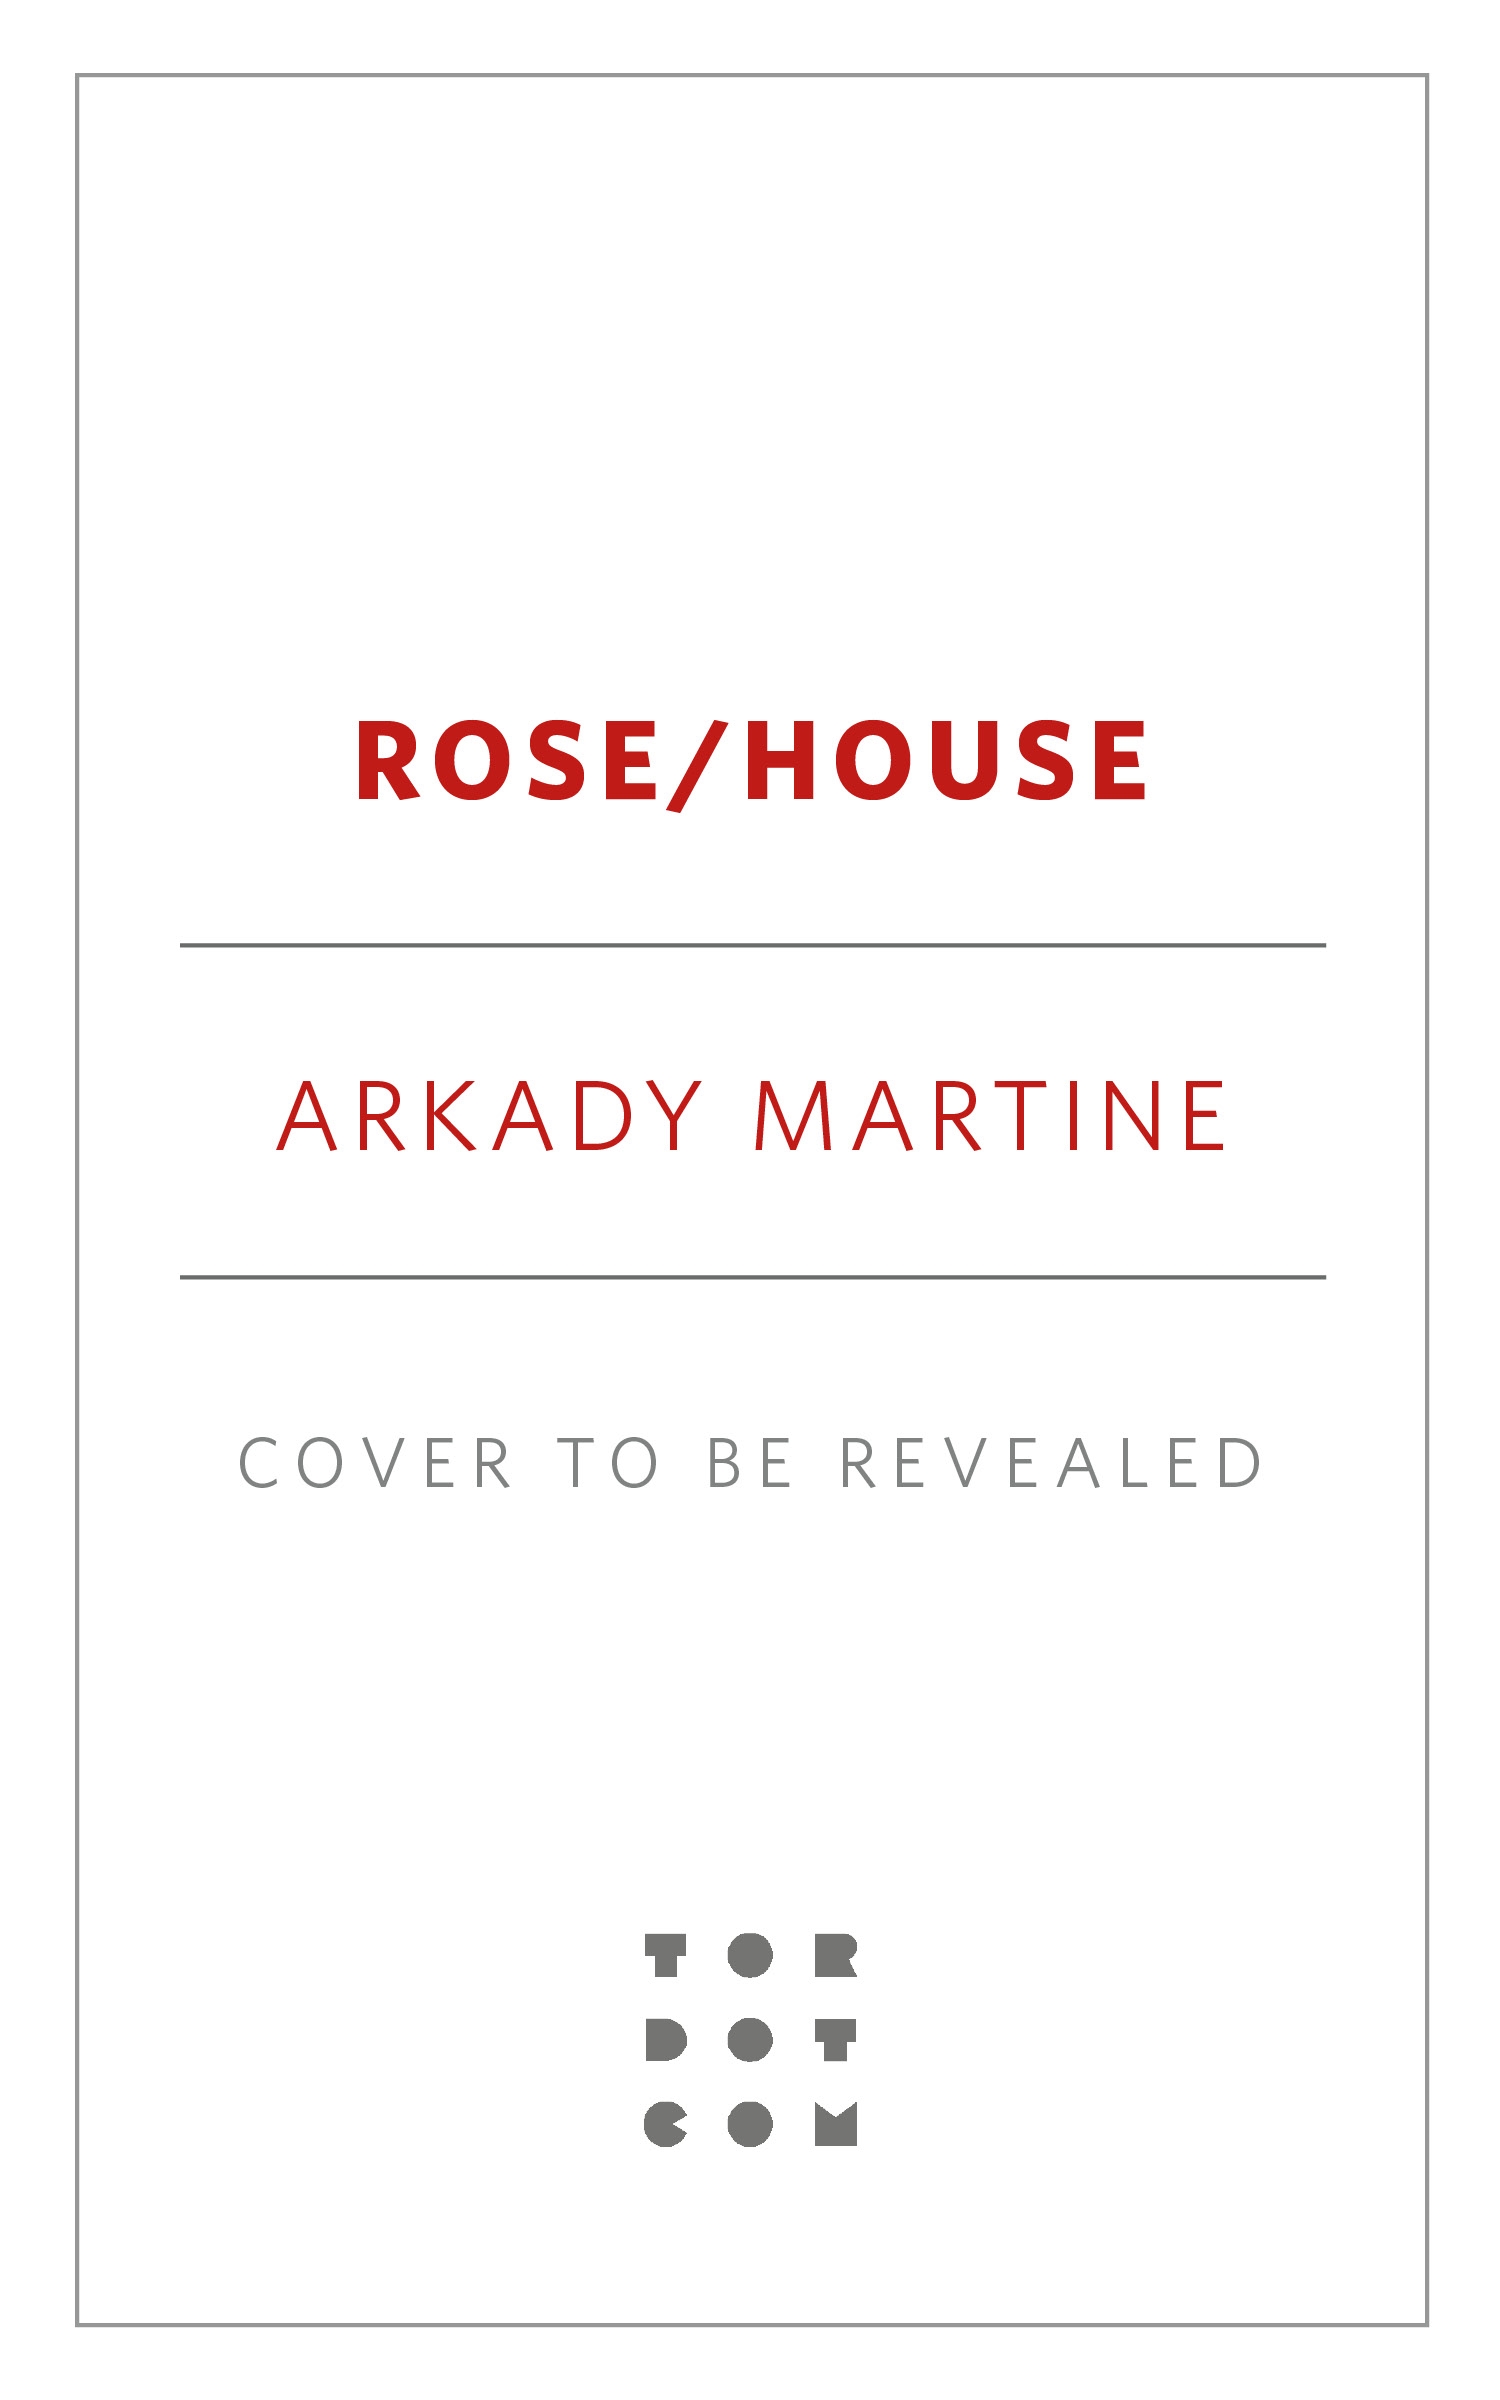 Rose/House by Arkady Martine